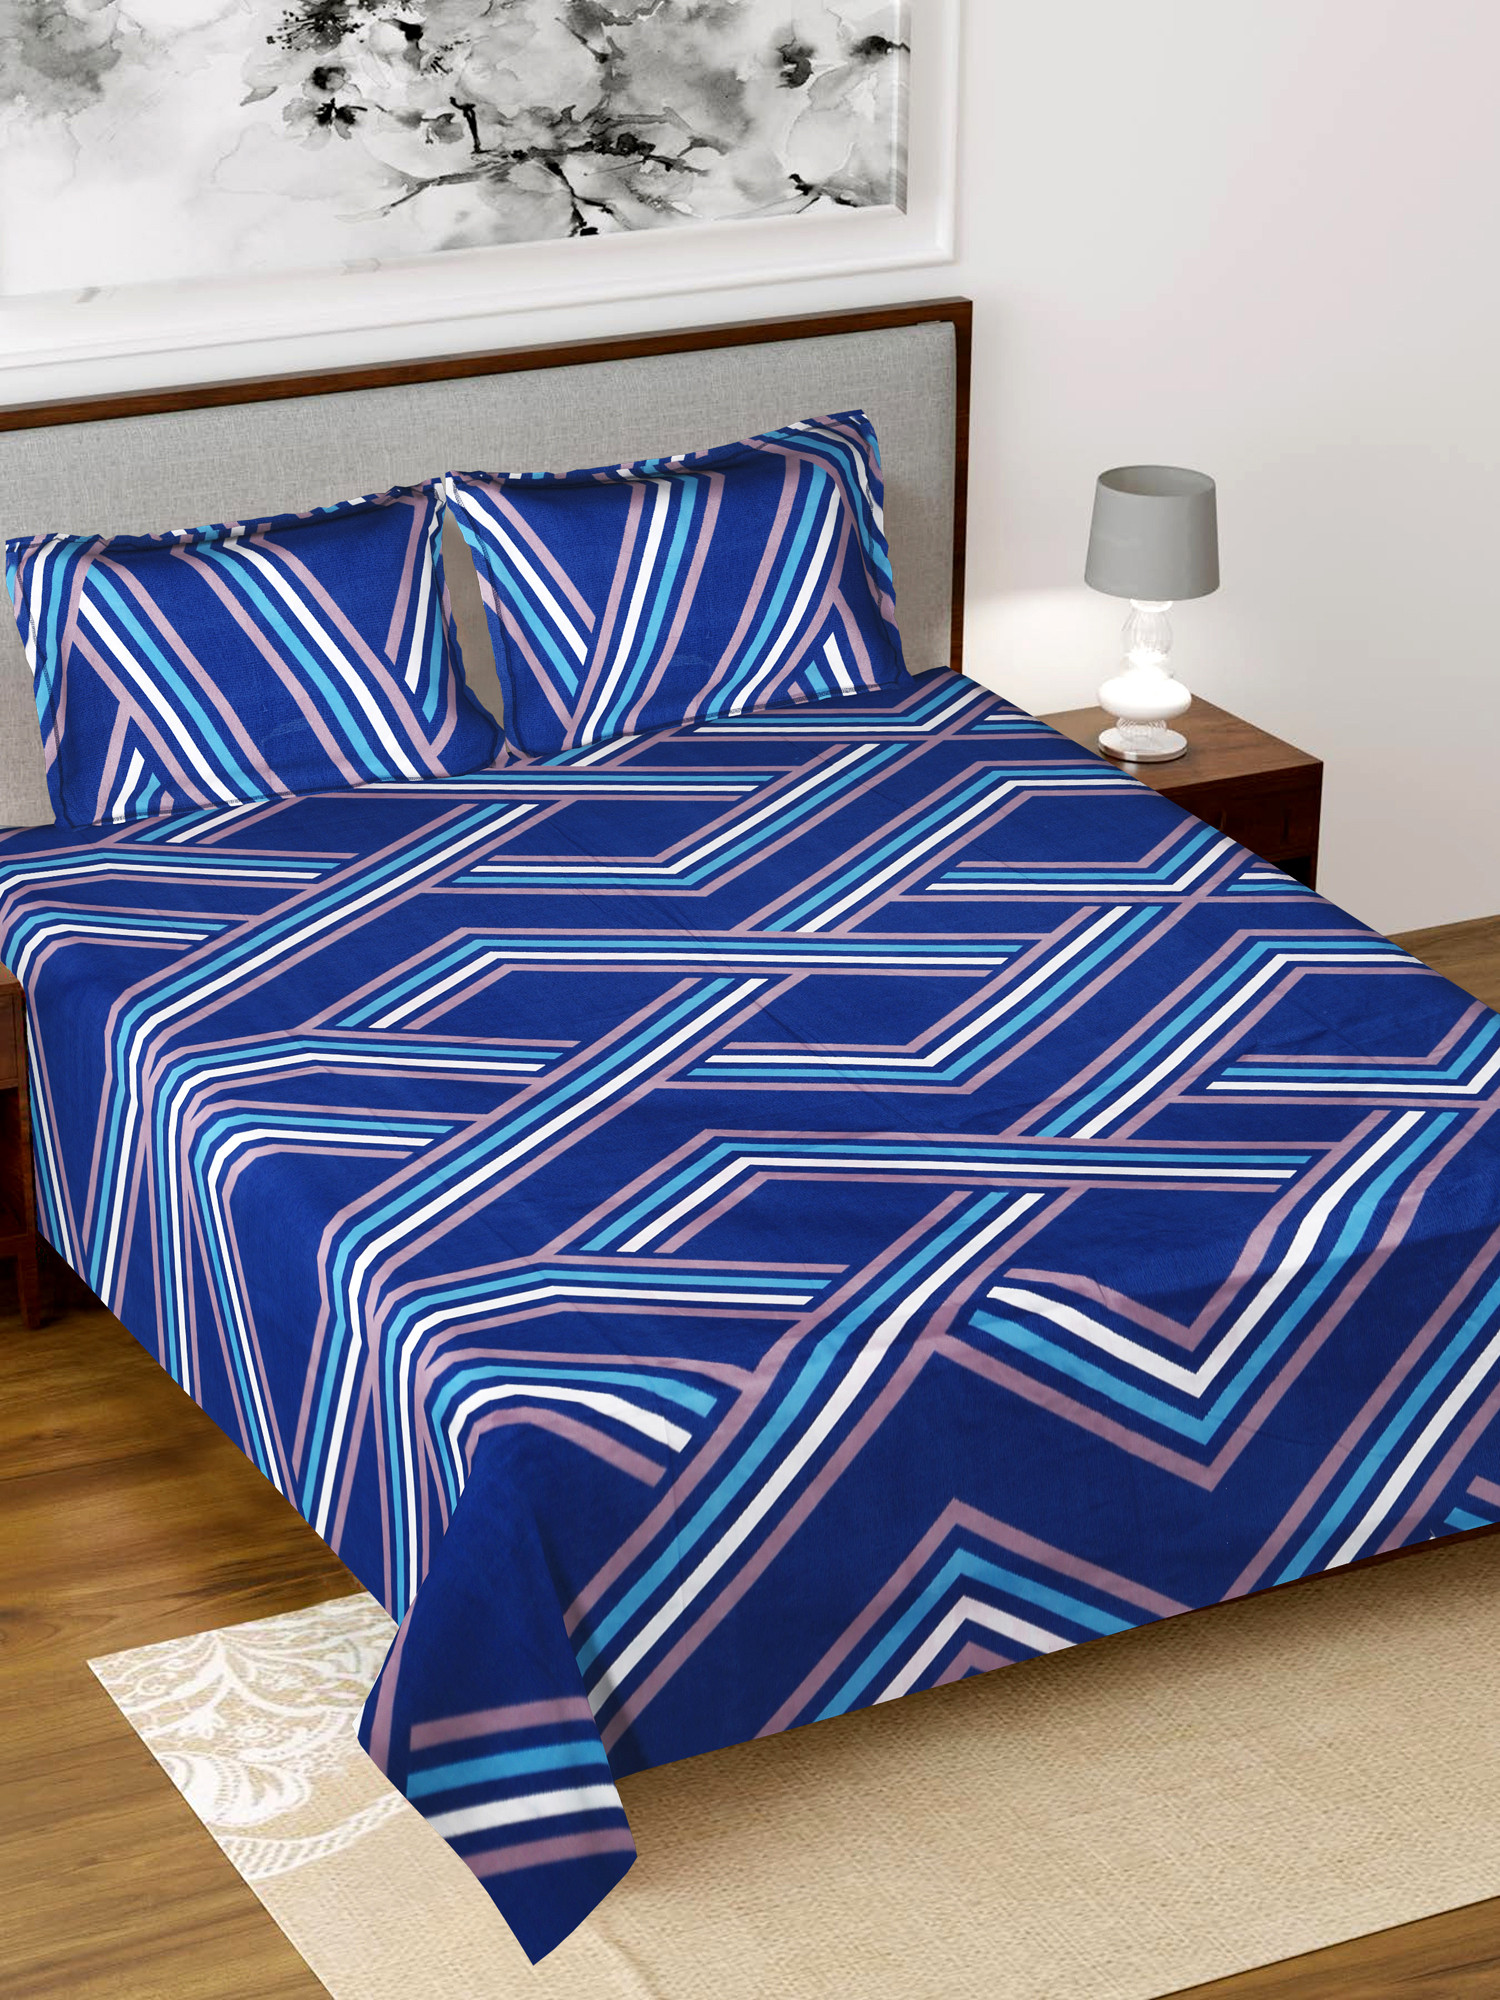 Kuber Industries Zig Zag Printed Luxurious Soft Breathable & Comfortable Glace Cotton Double Bedsheet With 2 Pillow Covers (Blue)-HS43KUBMART26799